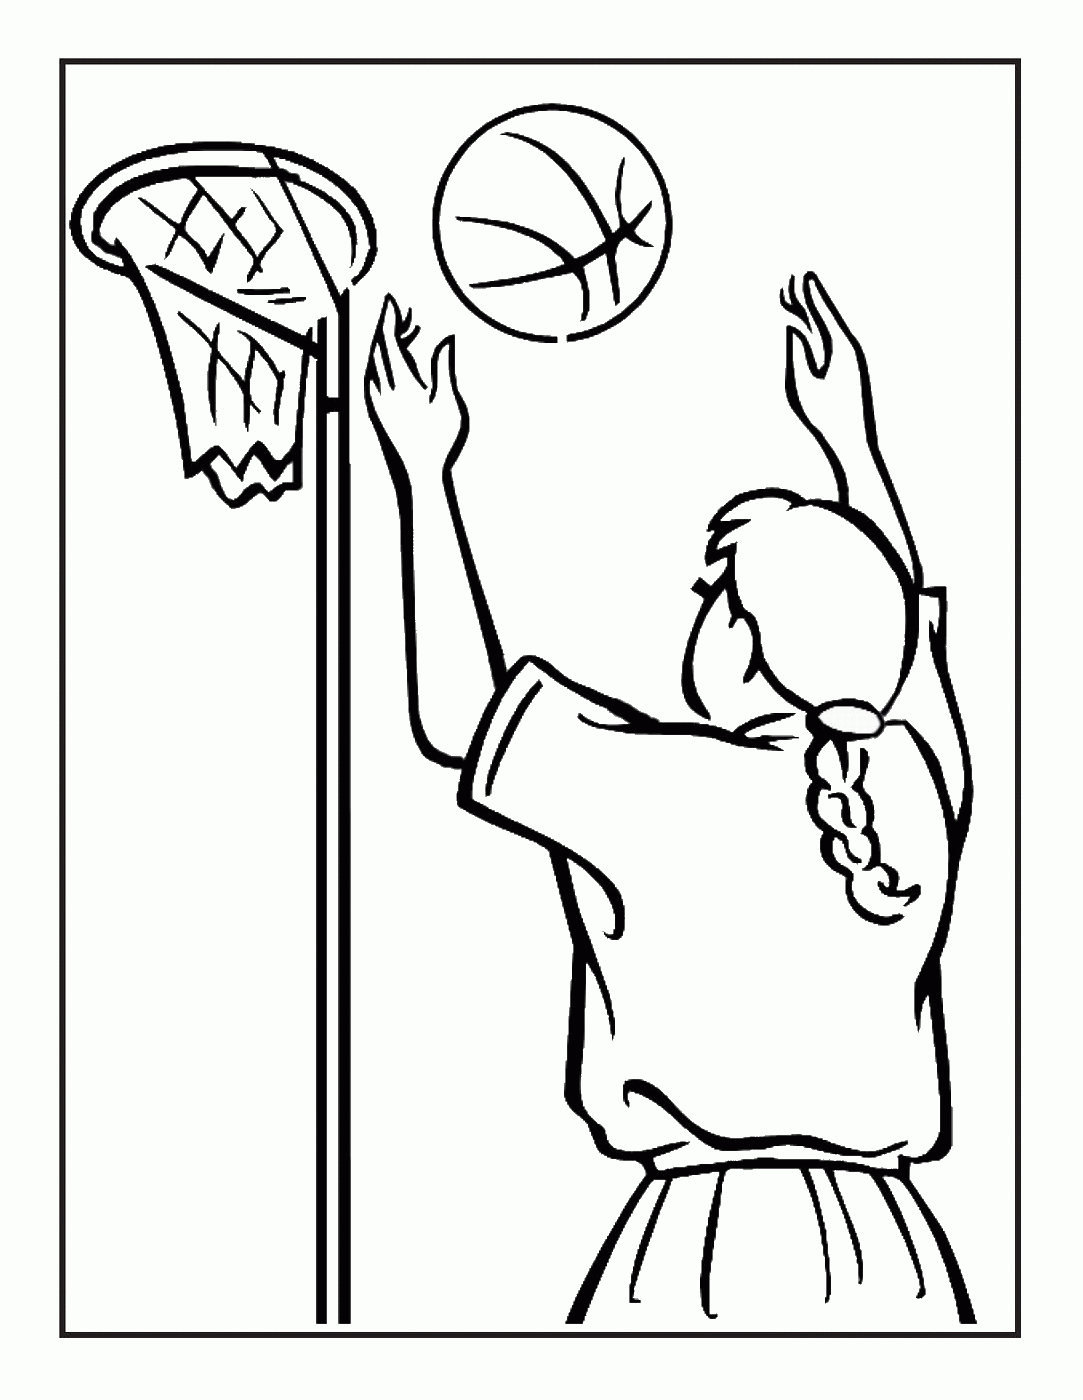 Download Basketball Coloring Pages